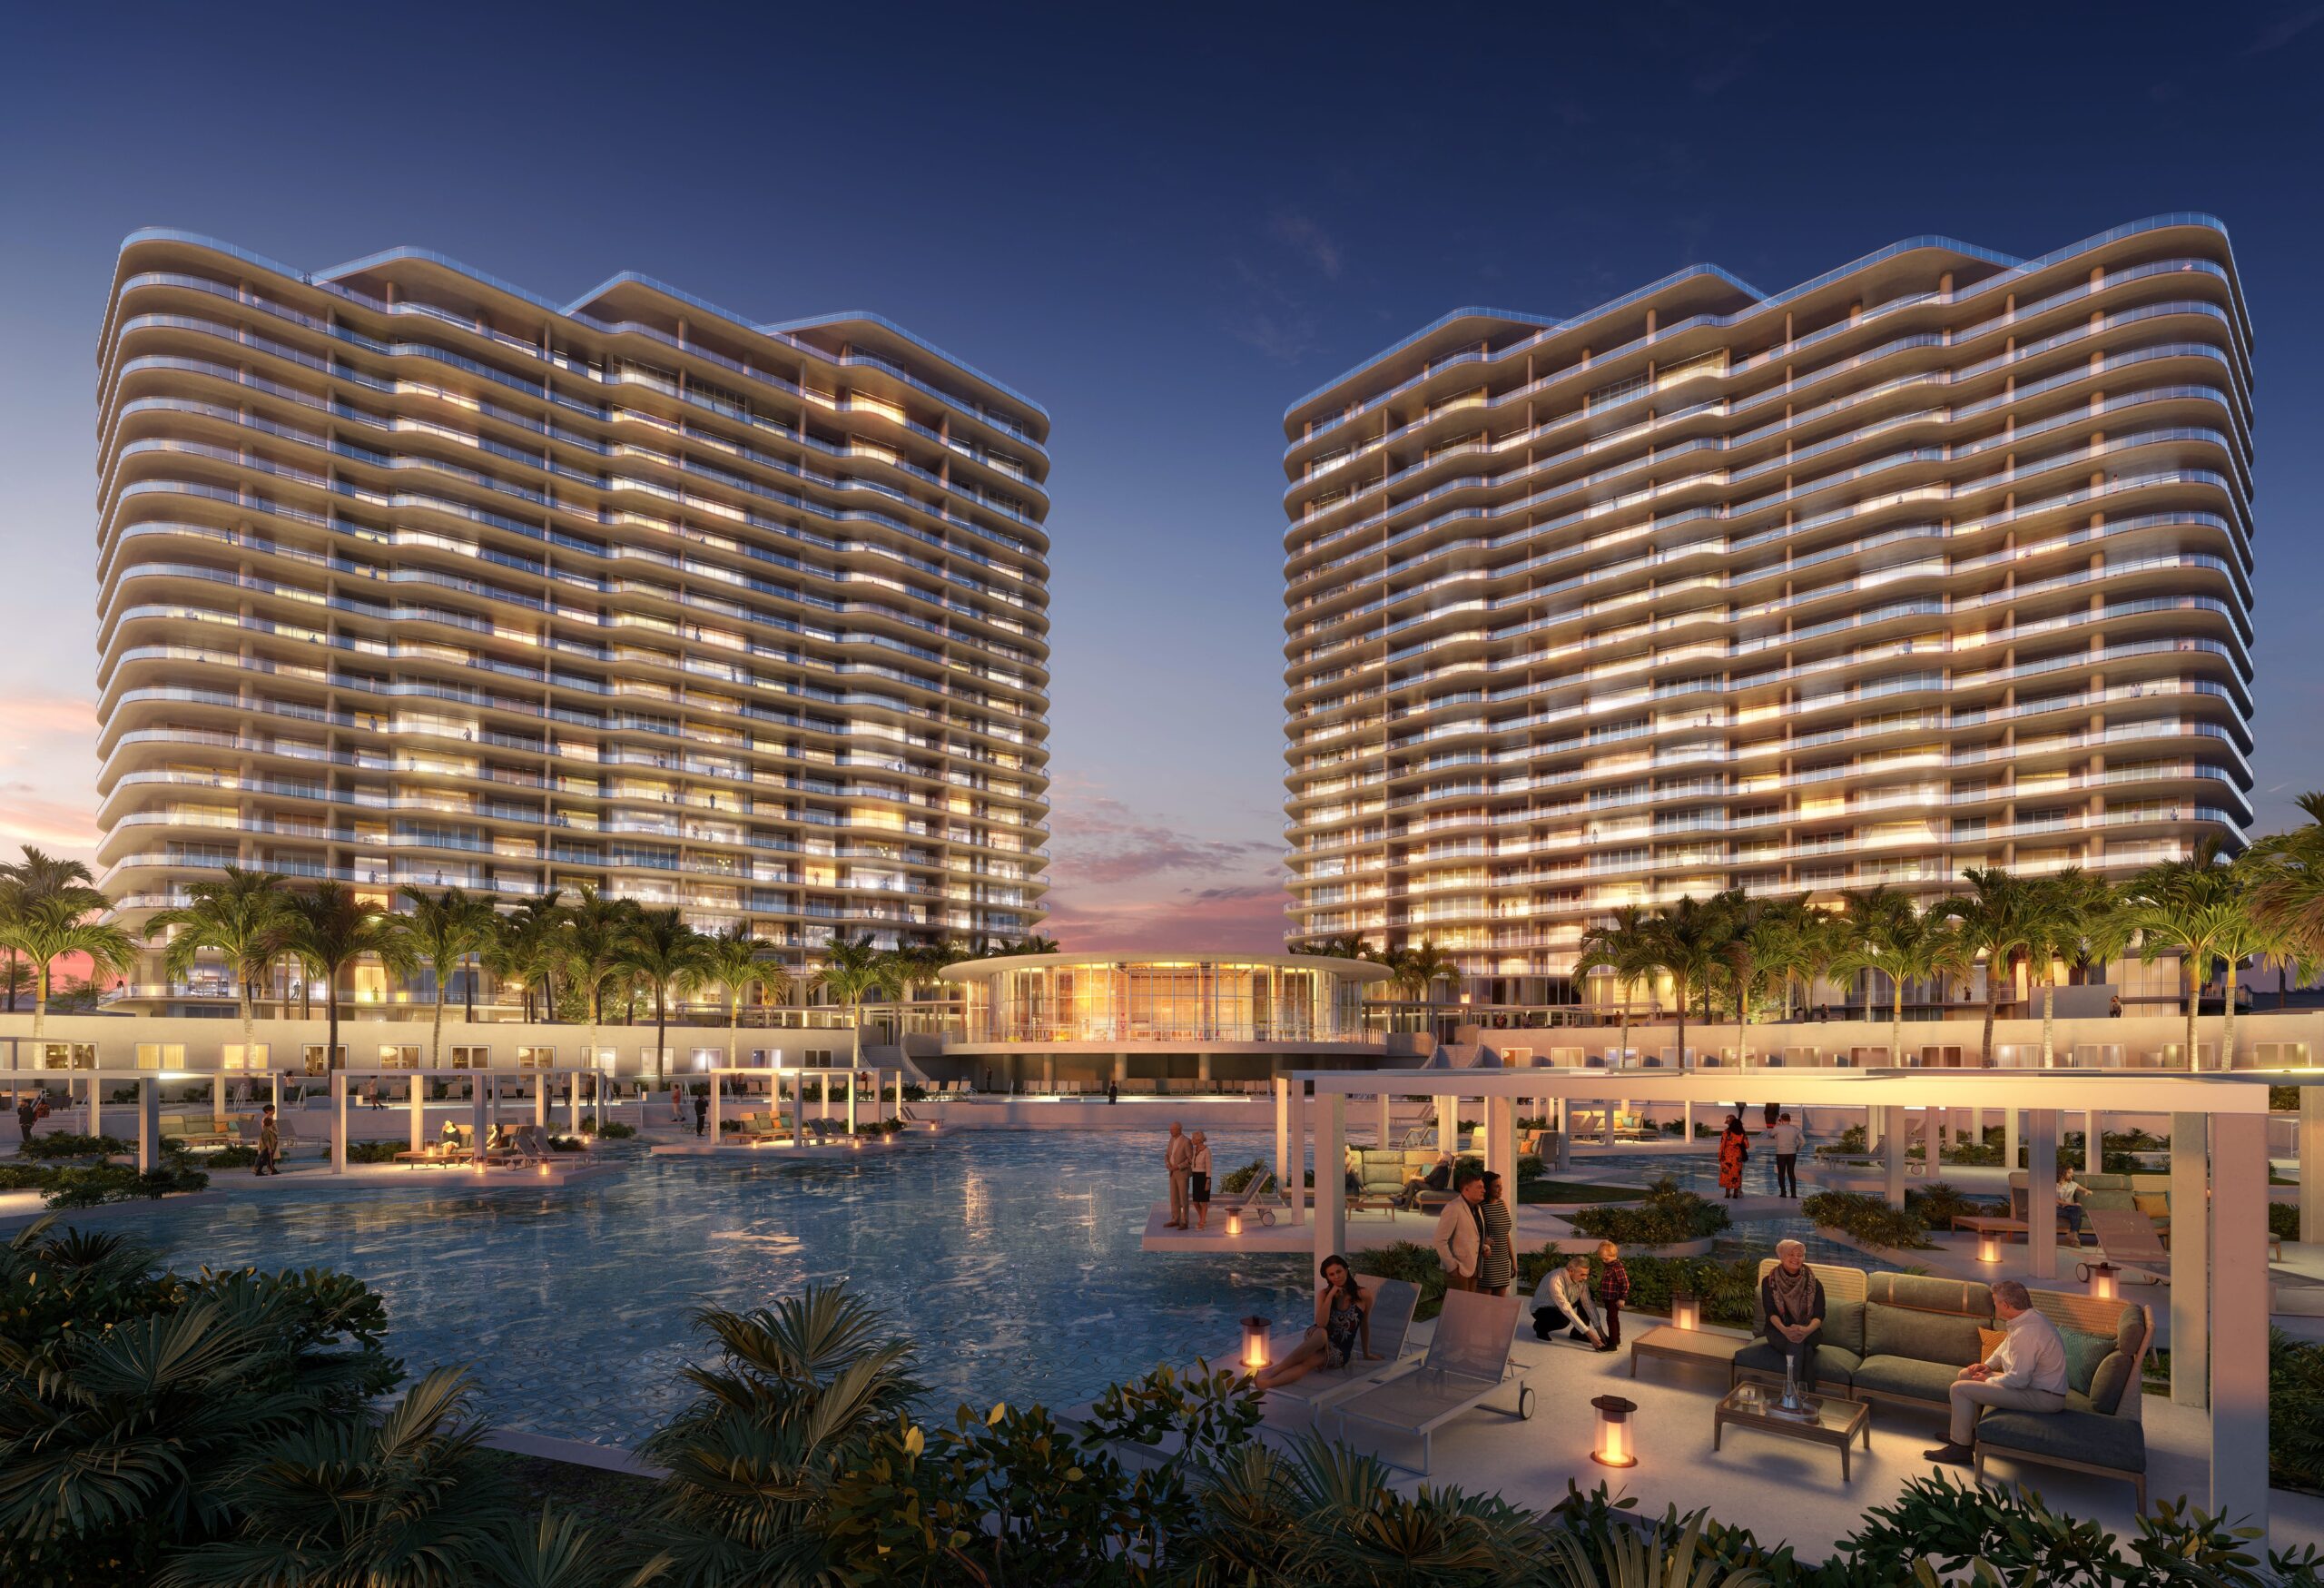 The Ritz-Carlton Residences, Estero Bay towers at dusk with pools, clubhouse and lagoon